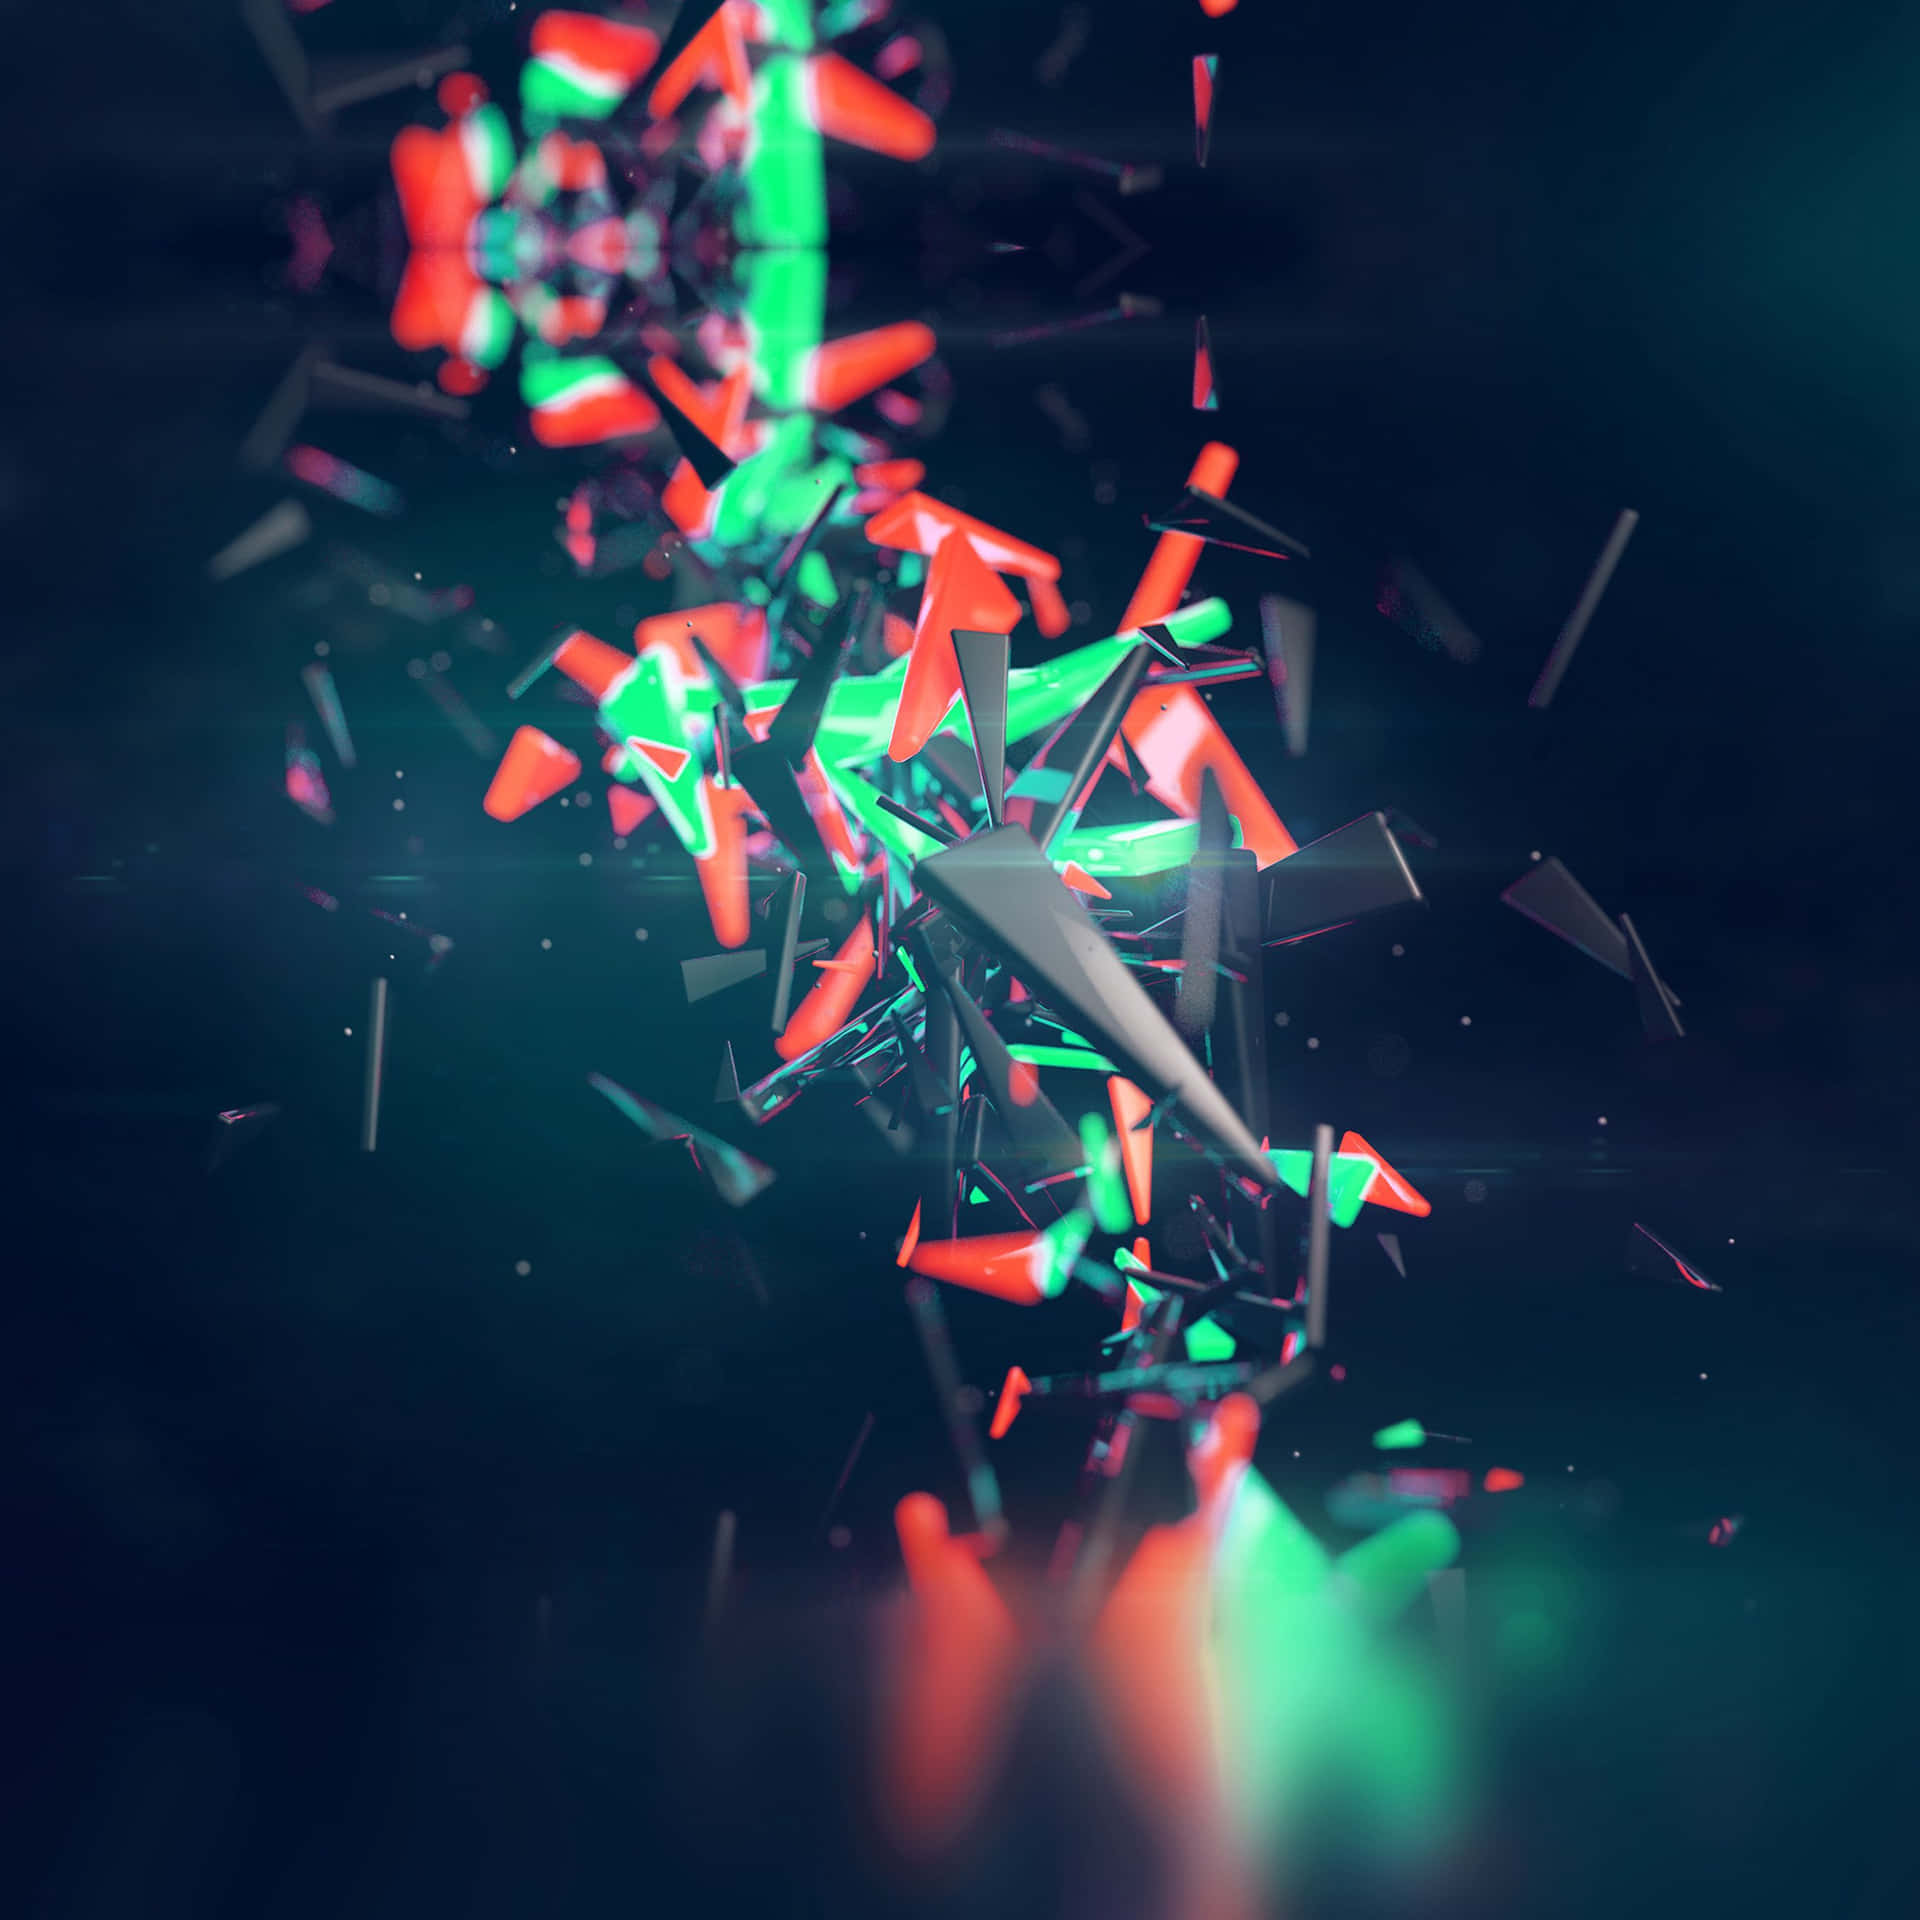 A Colorful Abstract Image Of A Broken Glass Background